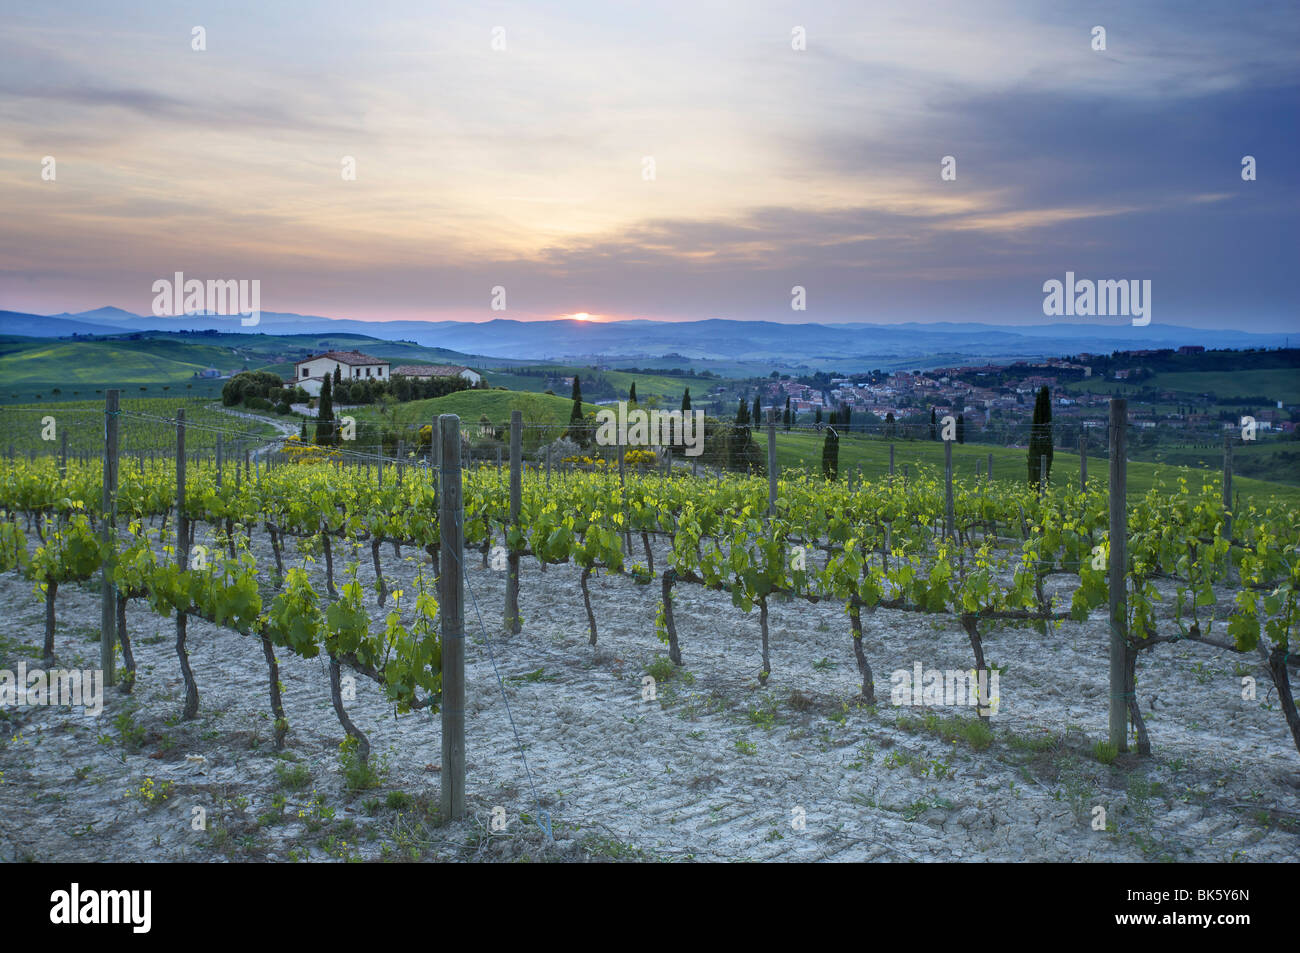 Vineyard at sunset above the village of Torrenieri, near San Quirico d'Orcia, Tuscany, Italy, Europe Stock Photo